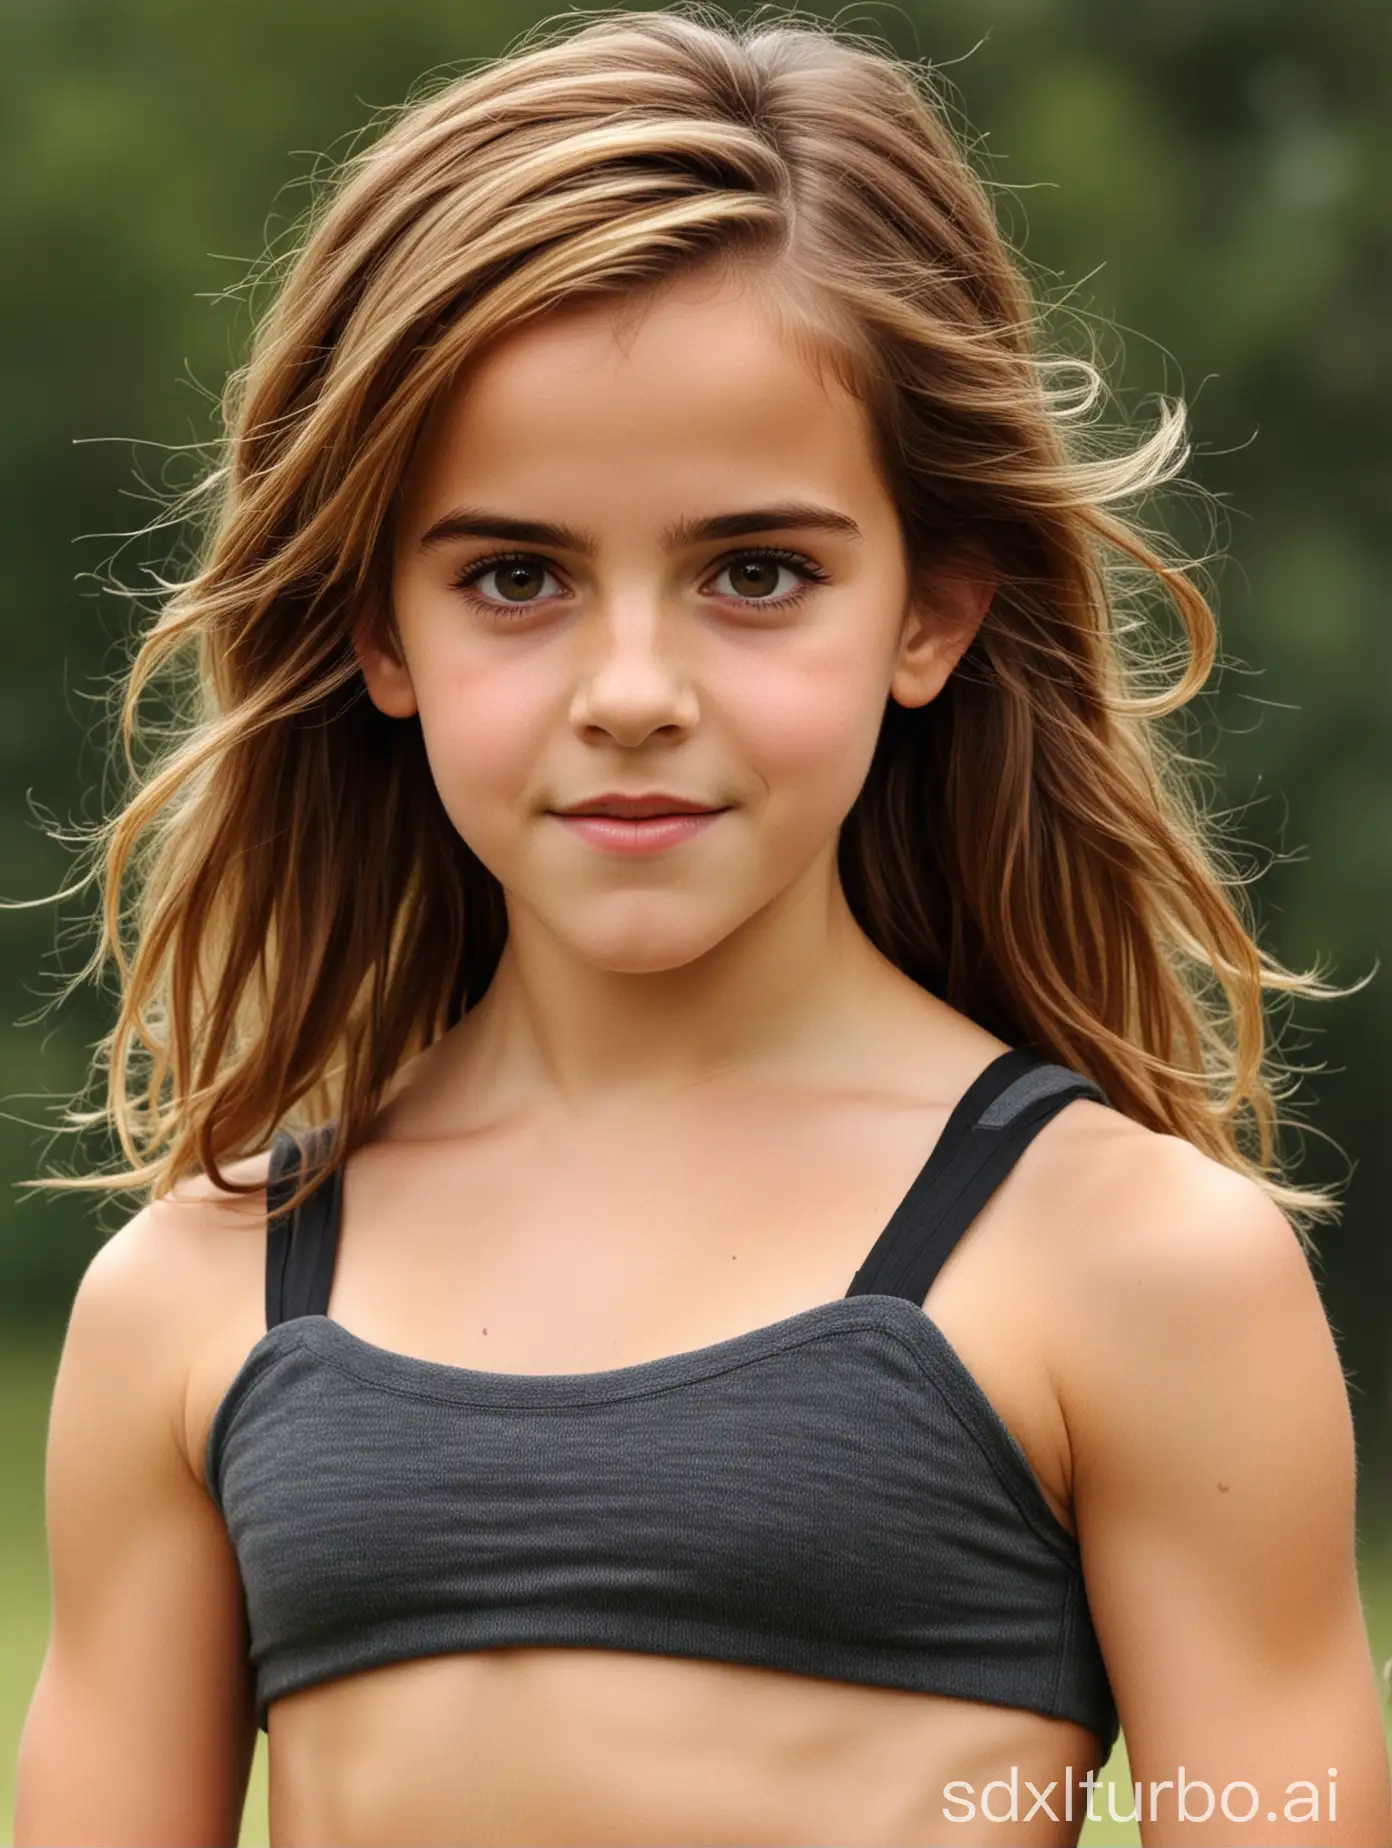 Emma Watson at 6 years old, long hair, very muscular abs, Hermiona